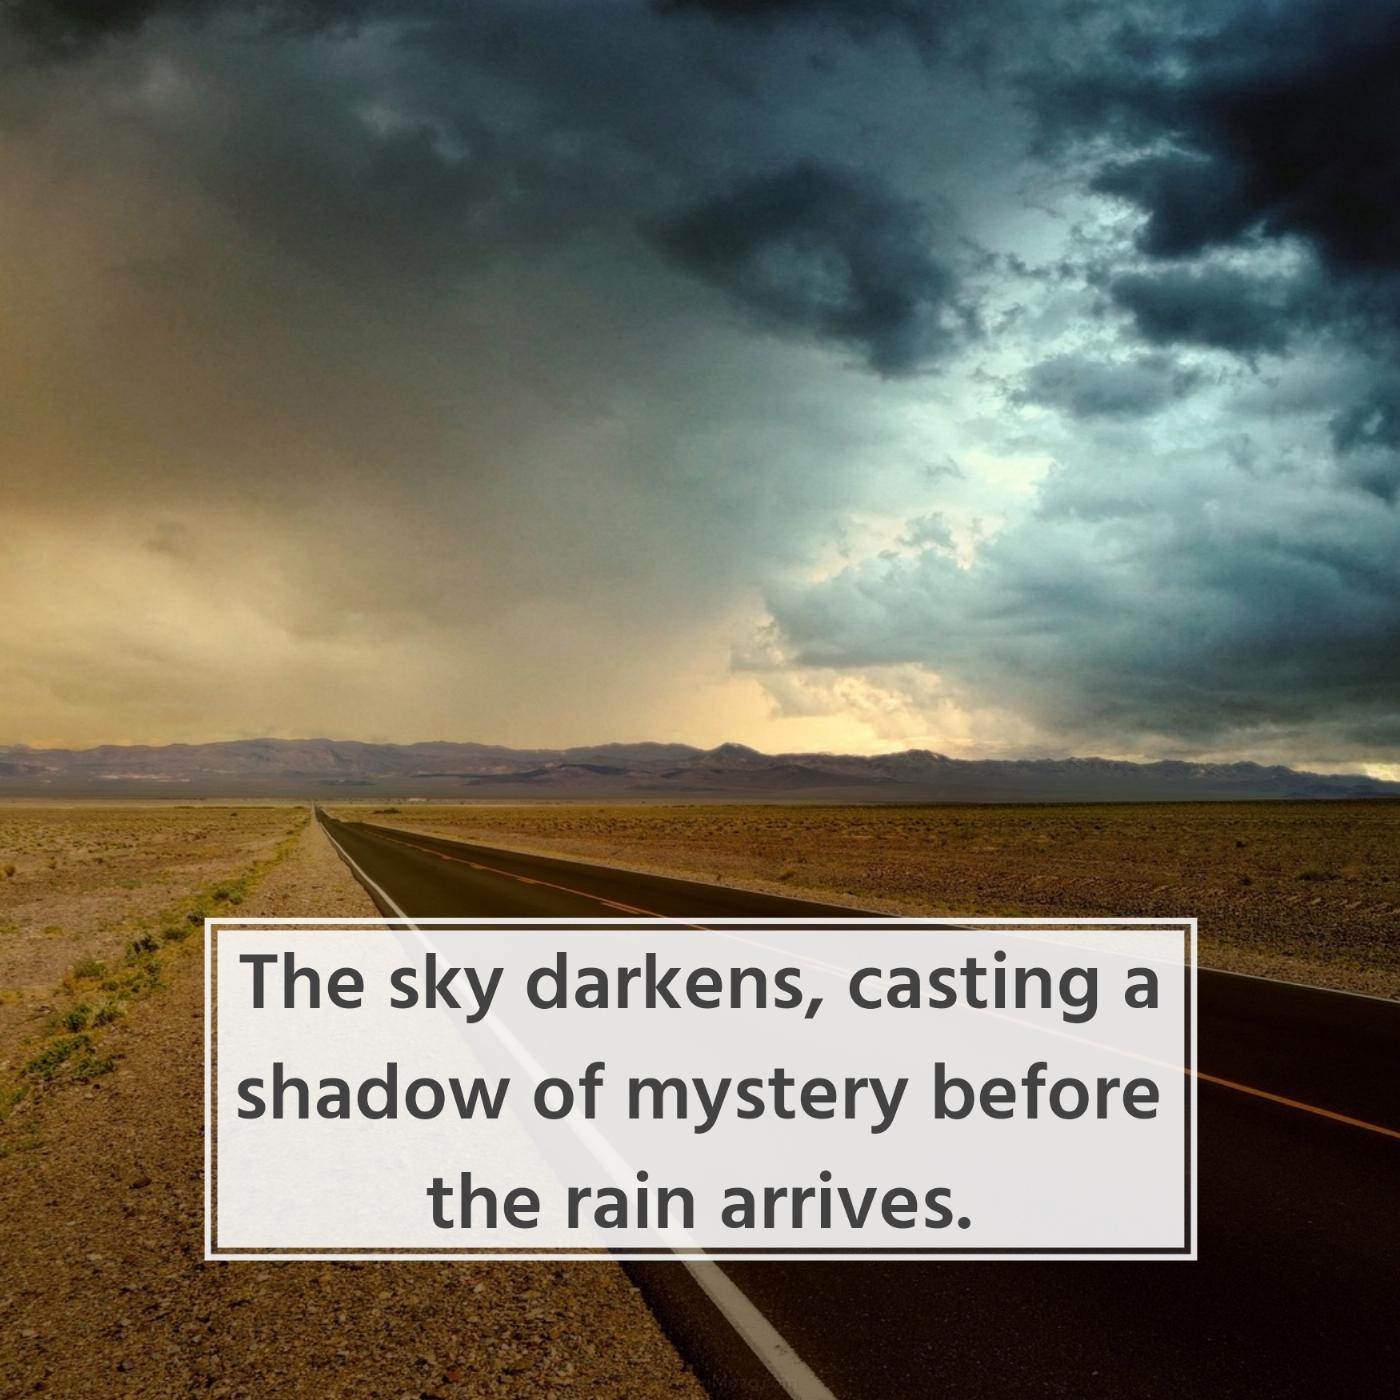 The sky darkens casting a shadow of mystery before the rain arrives